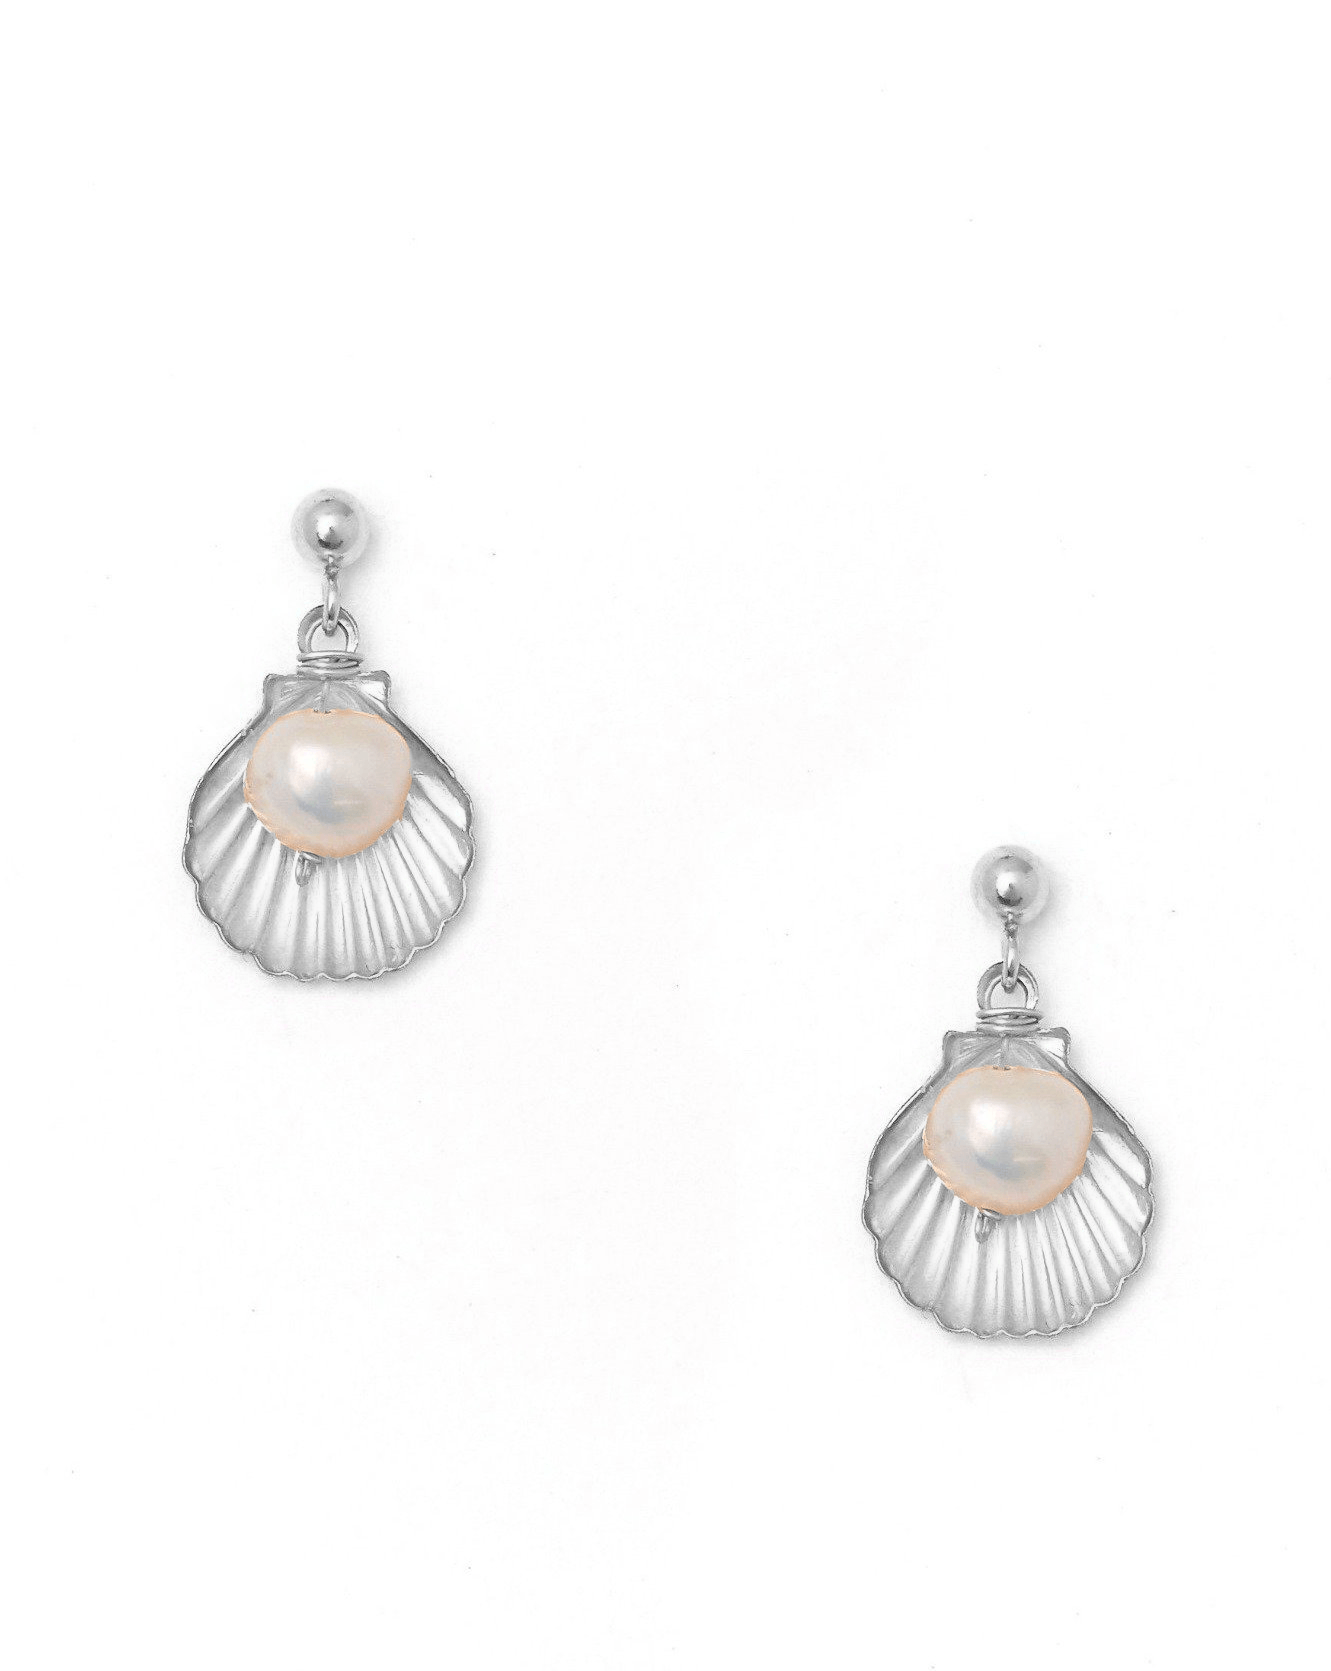 Belle Earrings by KOZAKH. Dangling earrings in Sterling Silver, featuring a 5mm flat irregular Pearl and a Shell charm.